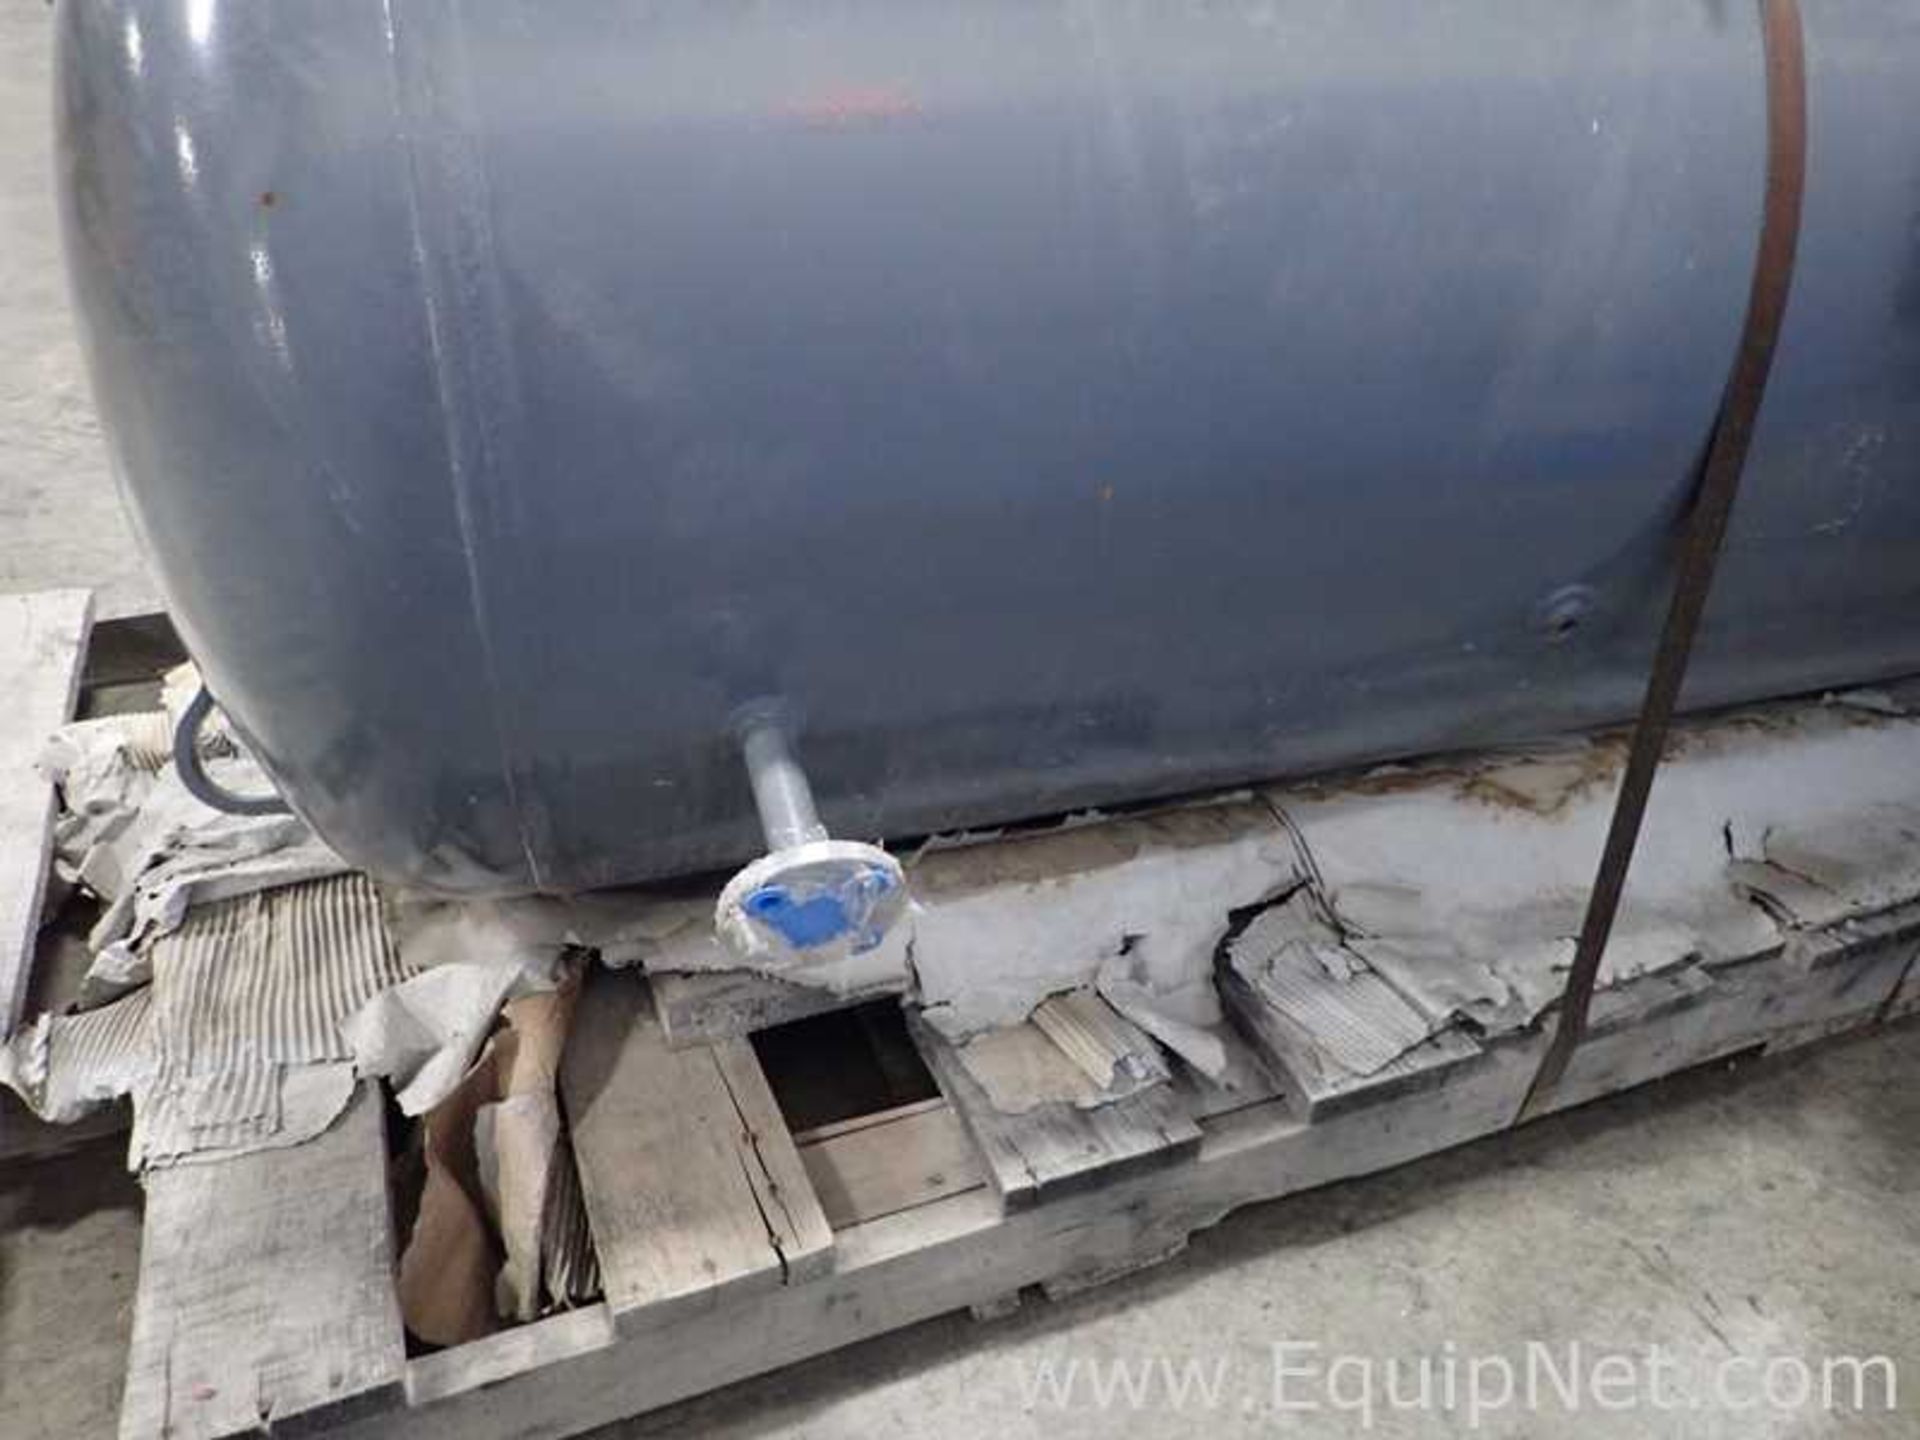 EQUIPNET LISTING #765750; REMOVAL COST: $40; DESCRIPTION: Steel Fab Carbon Steel Receiving Tank - Image 4 of 8